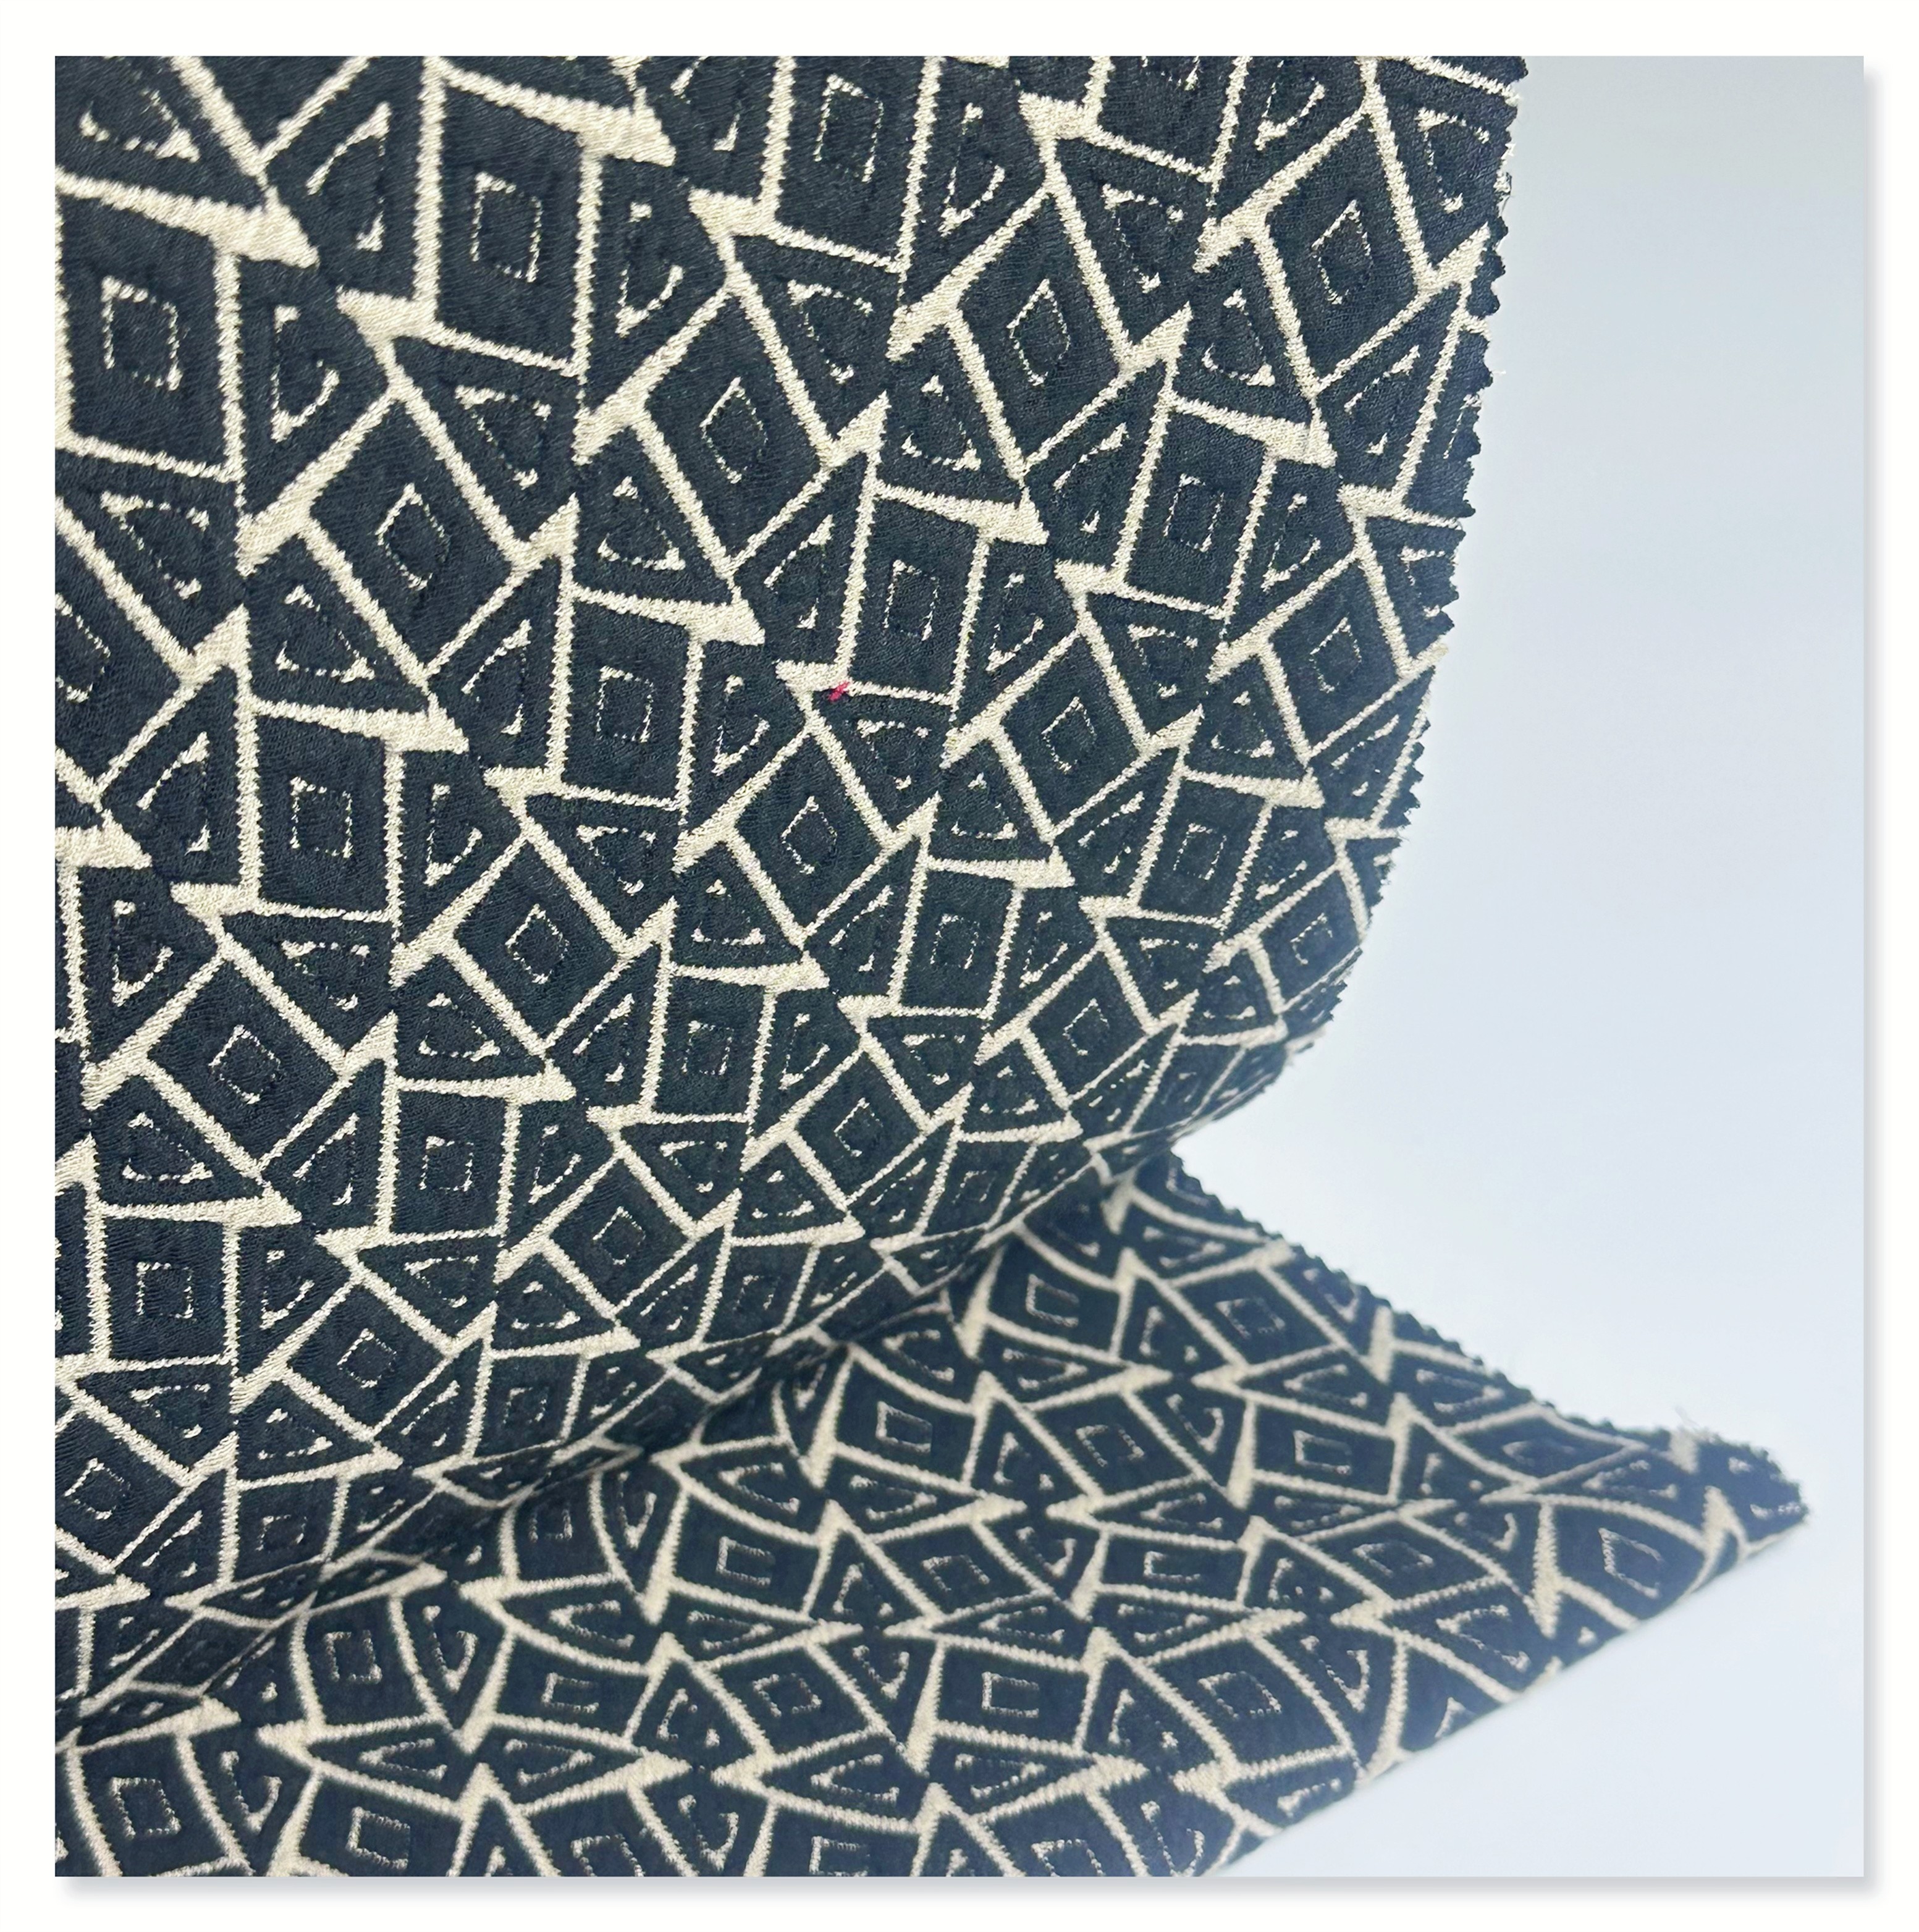 LA T/SP 96/4 Customized Hot Selling Jacquard Material Knitted Fabric spandex woven fabrics for clothing